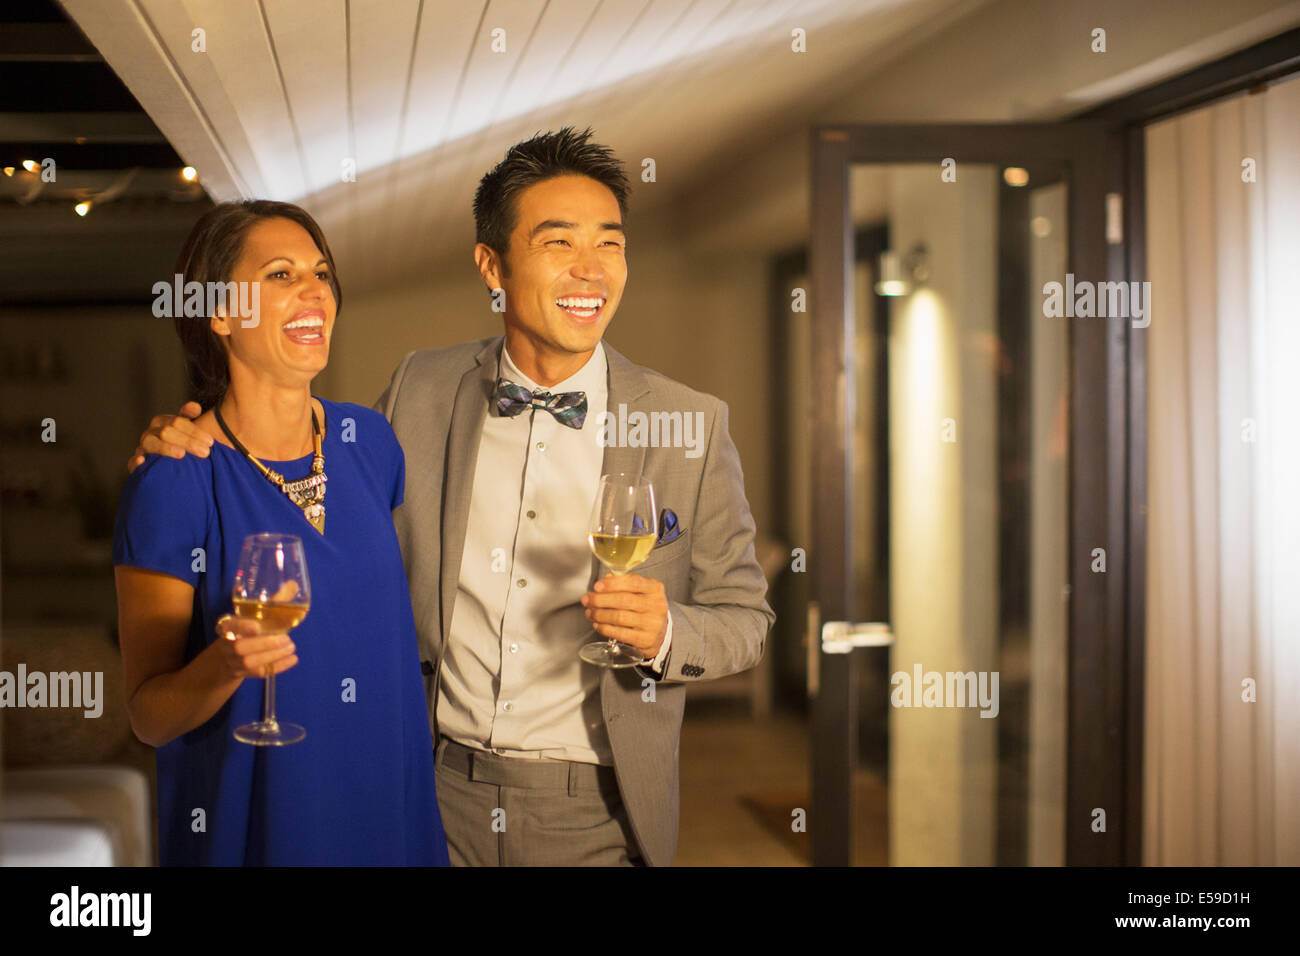 Couple laughing together at party Banque D'Images